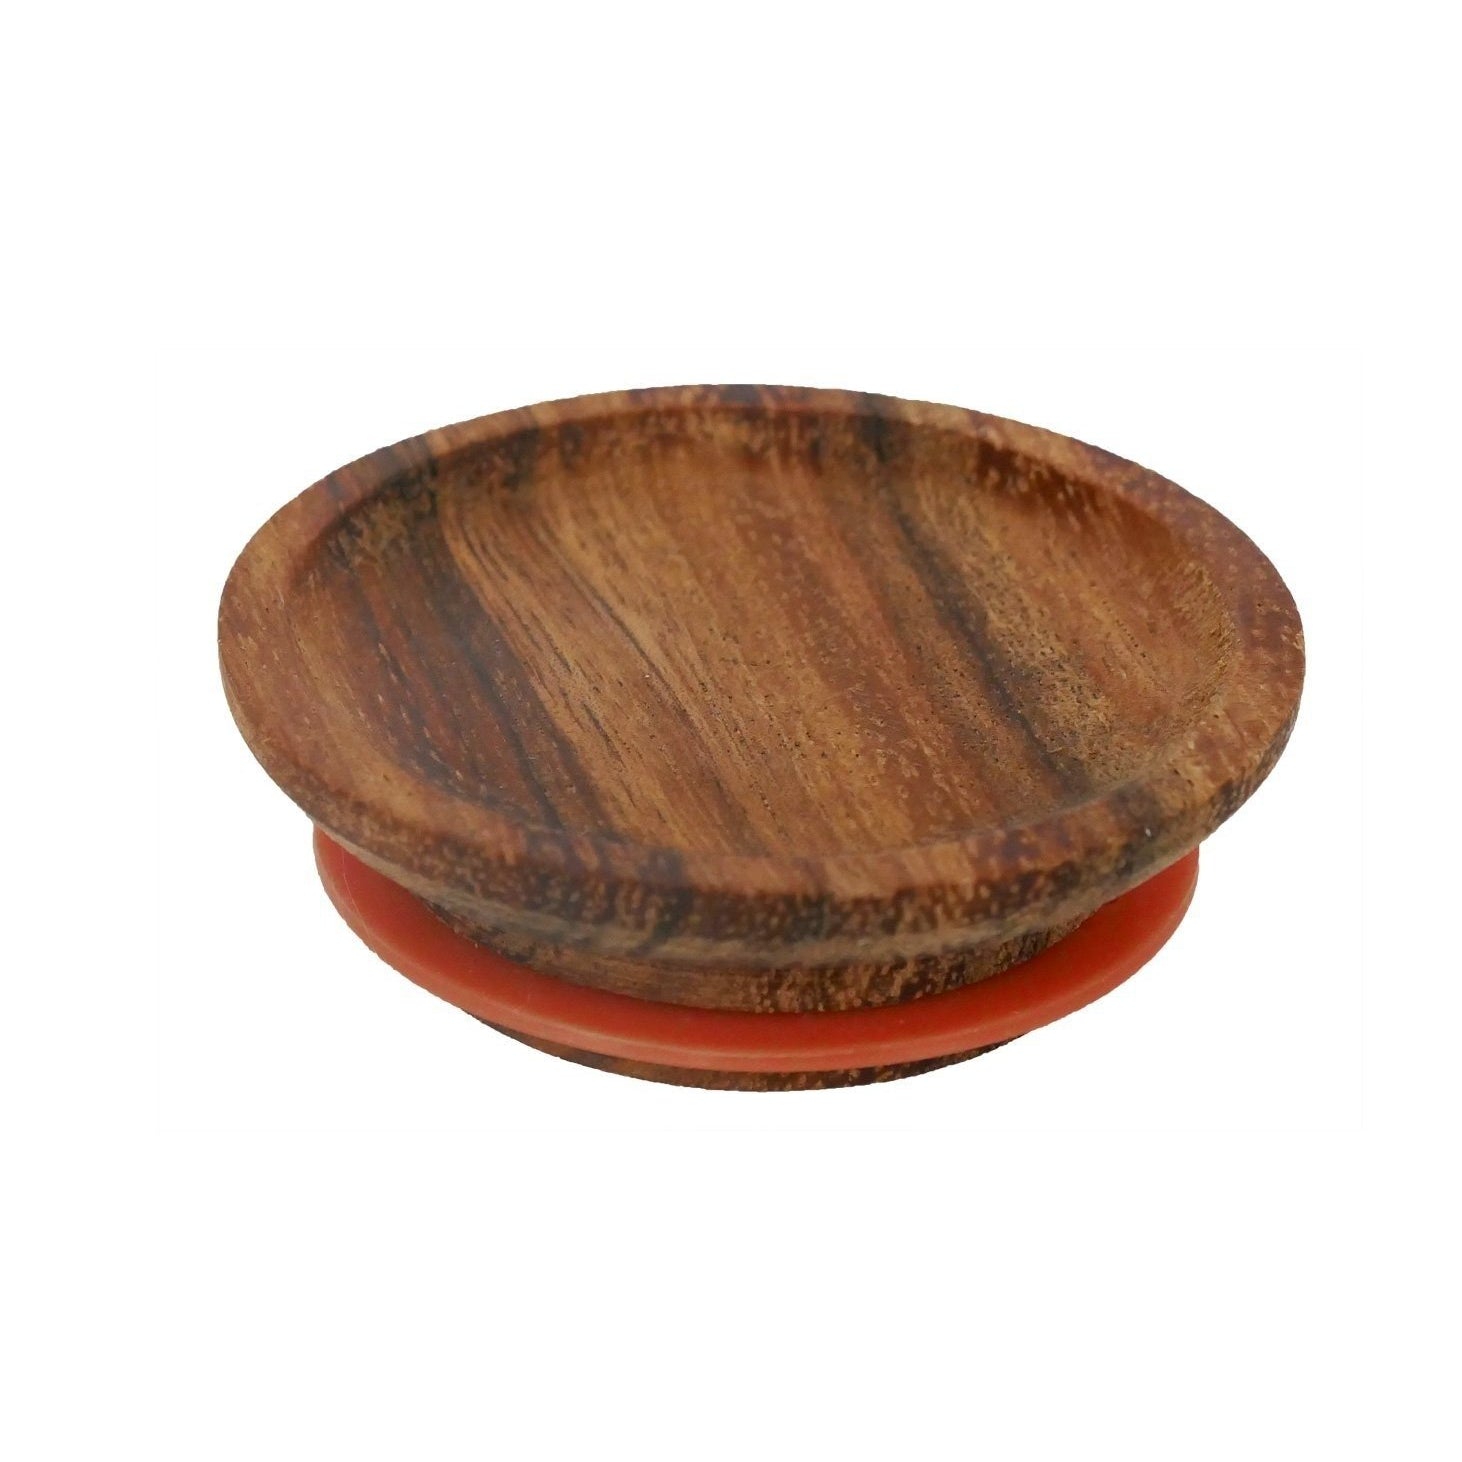 Weck Wooden Lid Small